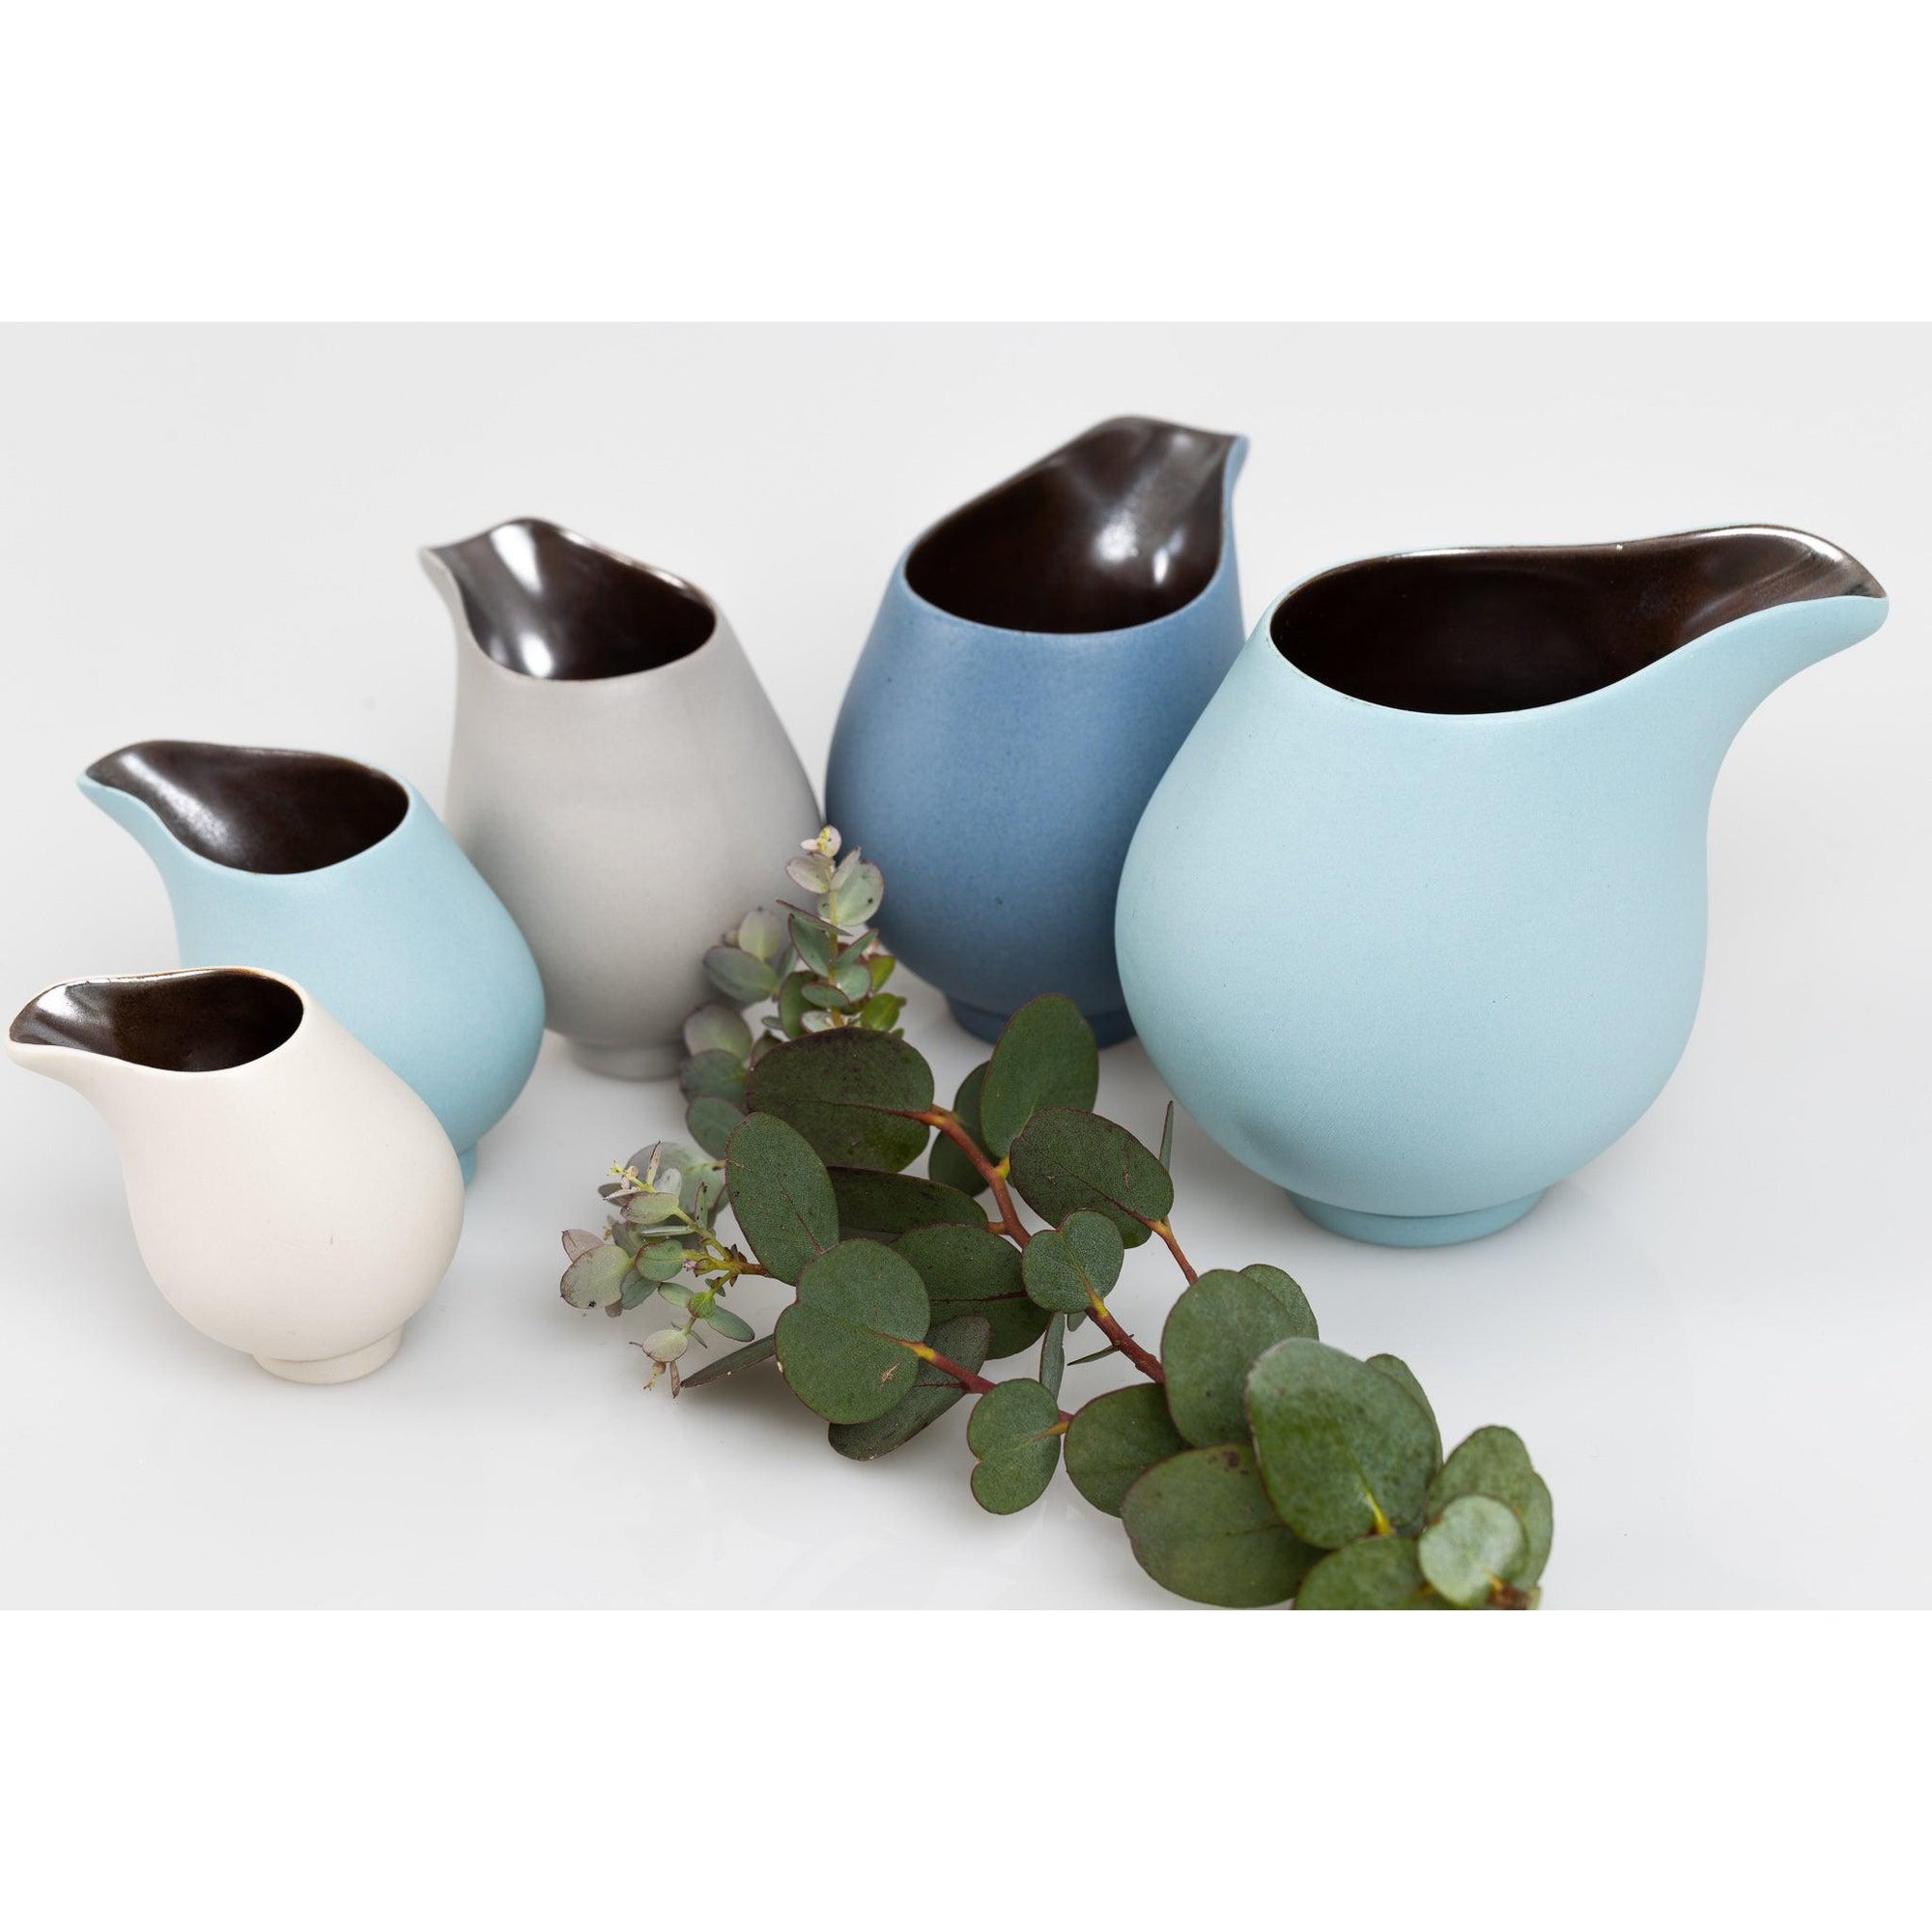 KSC2 Flow, Ocean Blue Stoneware Jug by Kate Schuricht, available at Padstow Gallery, Cornwall